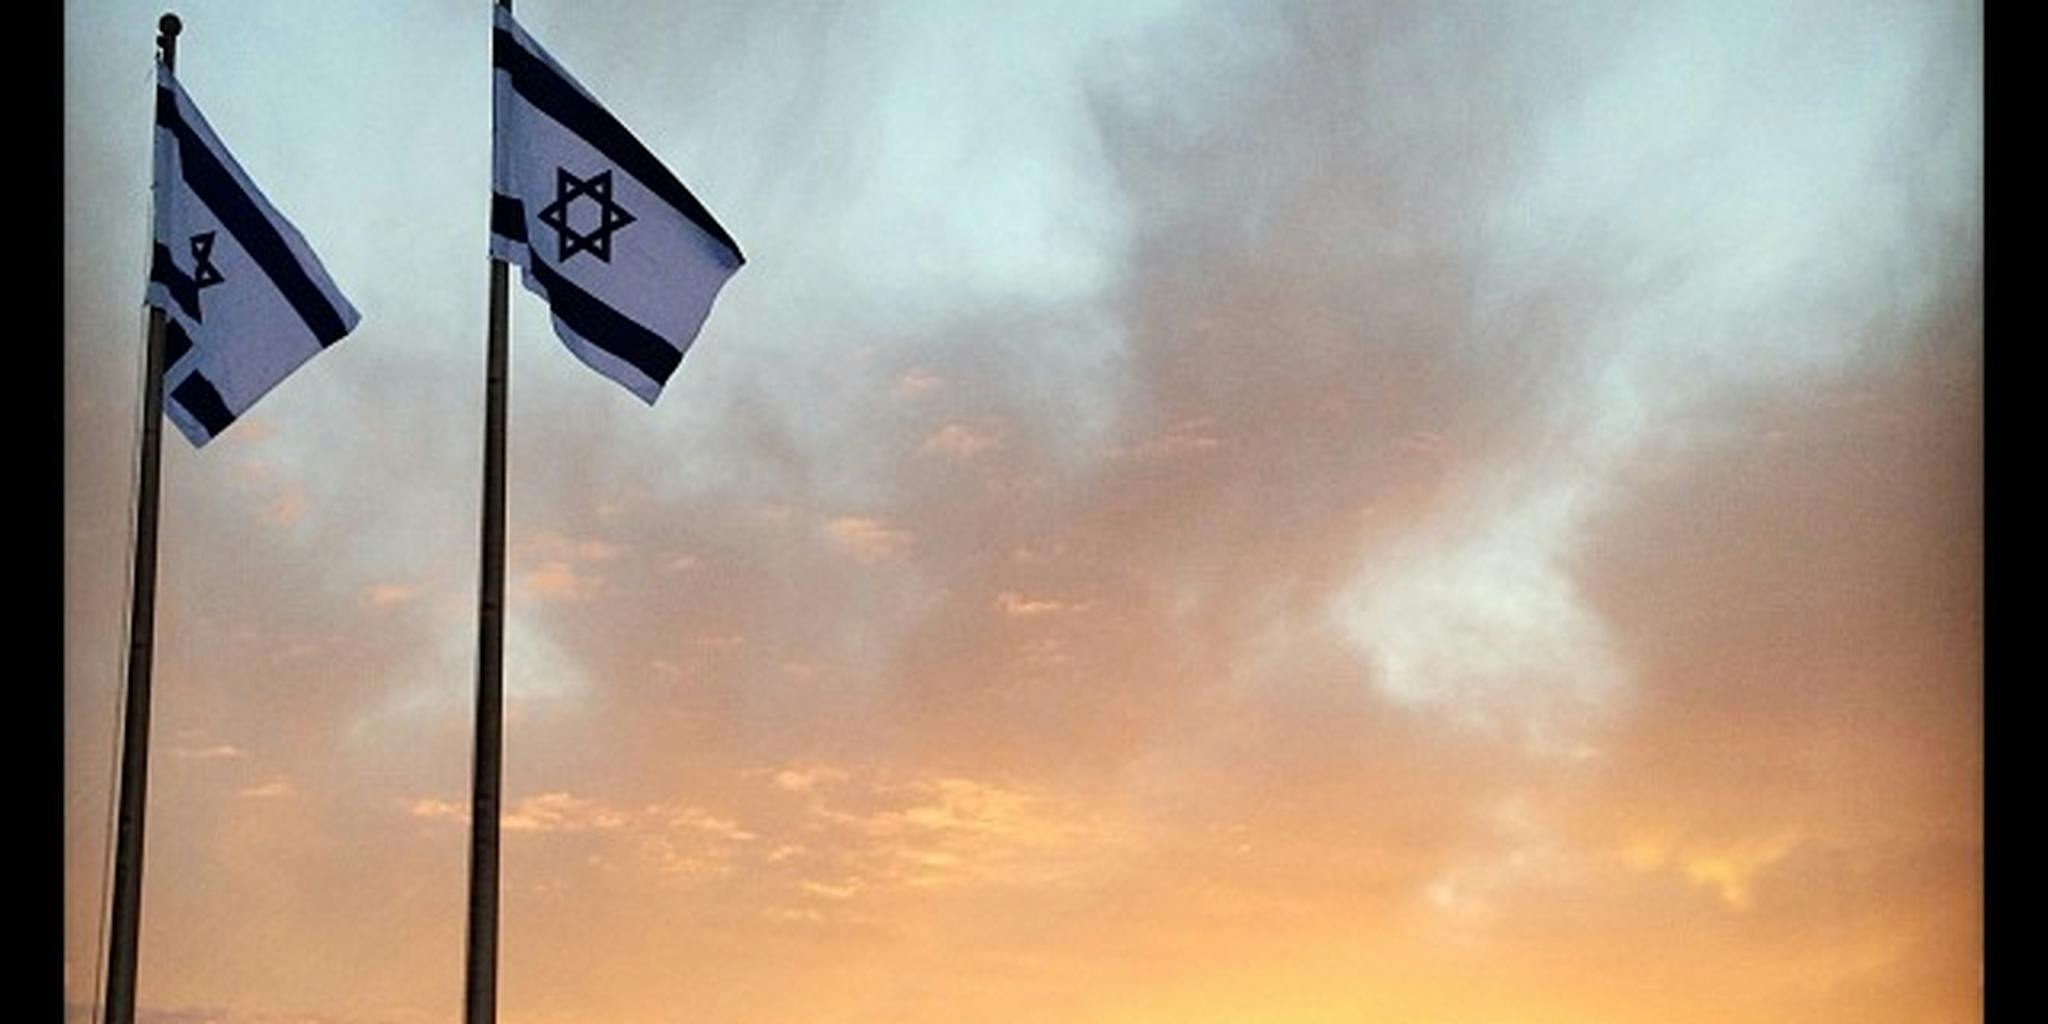 Revenge porn is now illegal in Israel